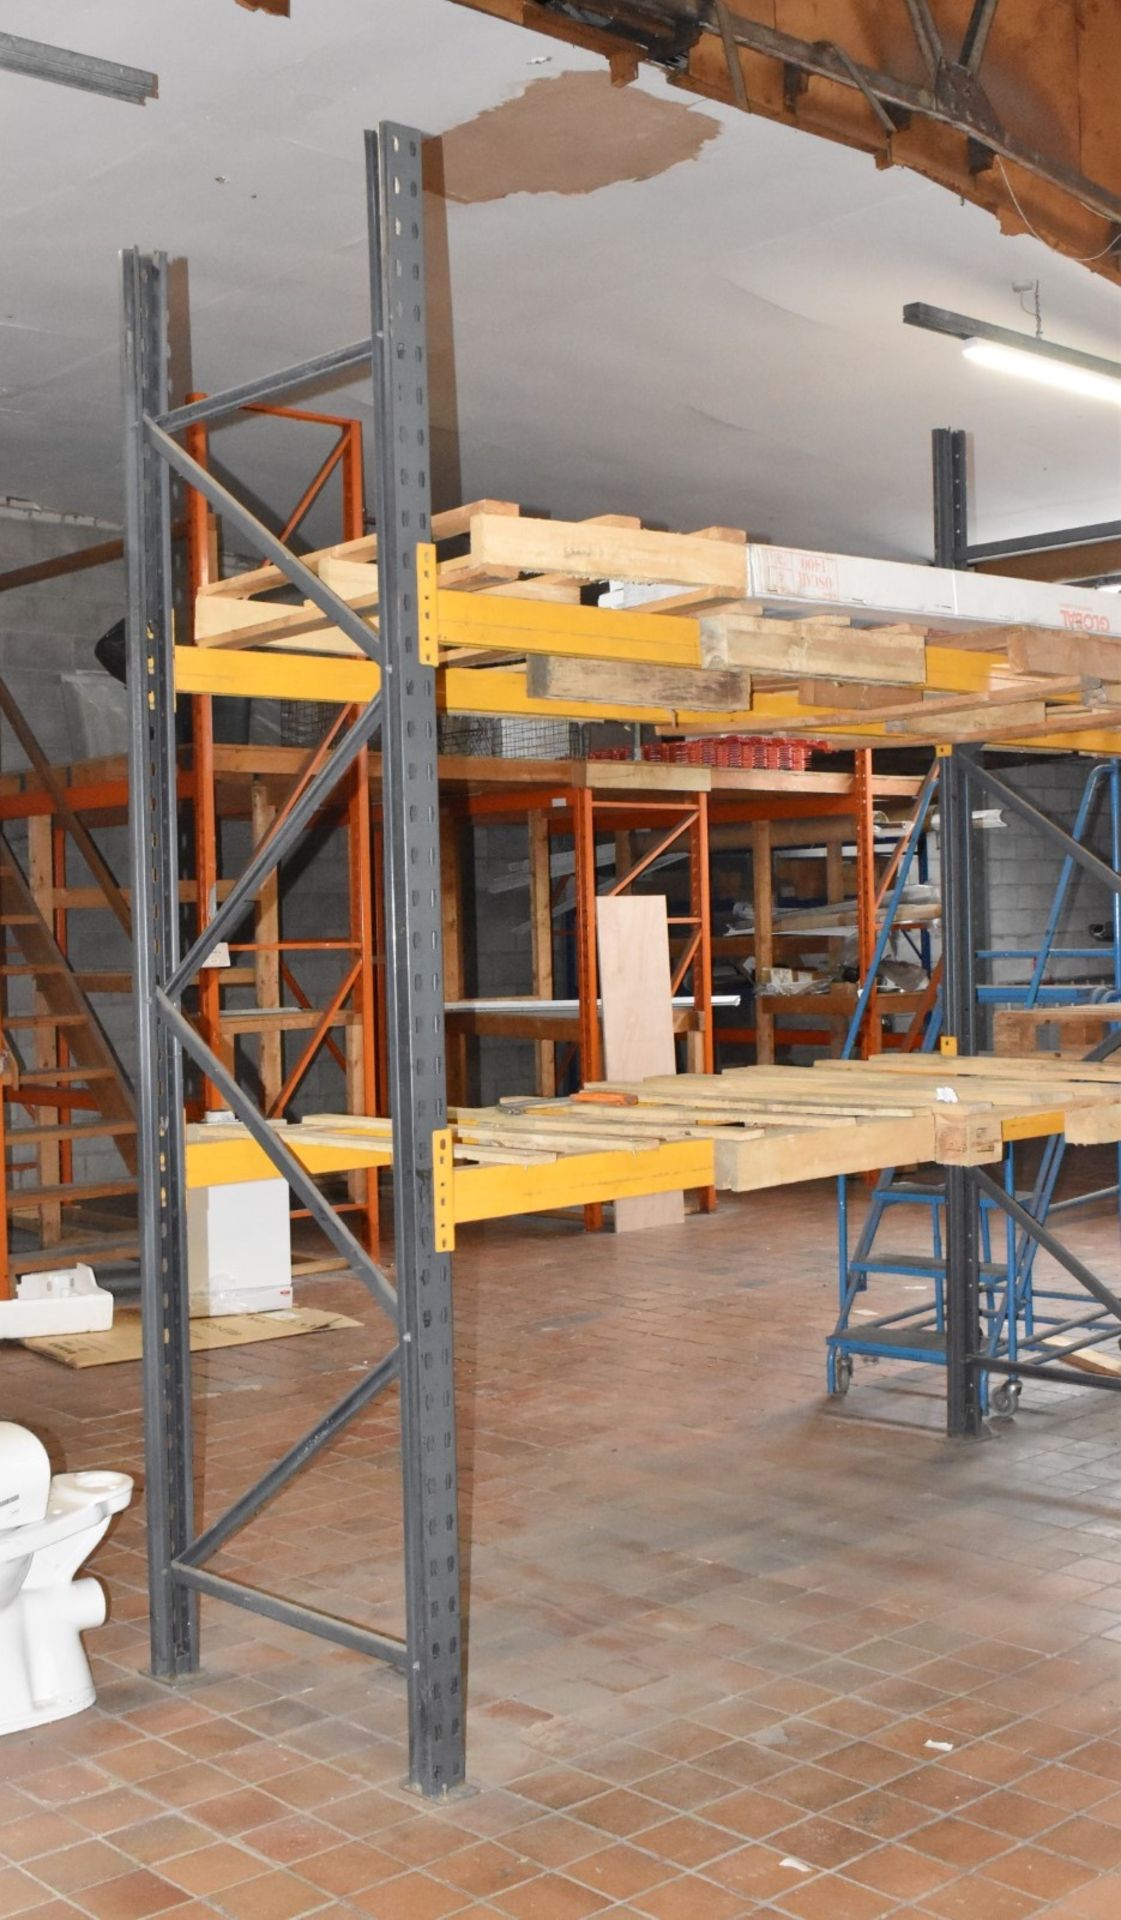 2 x Bays of Pallet Racking - Includes 3 x Uprights and 8 x Crossbeams - Size: H300 x W500 x D90cms - Image 2 of 5